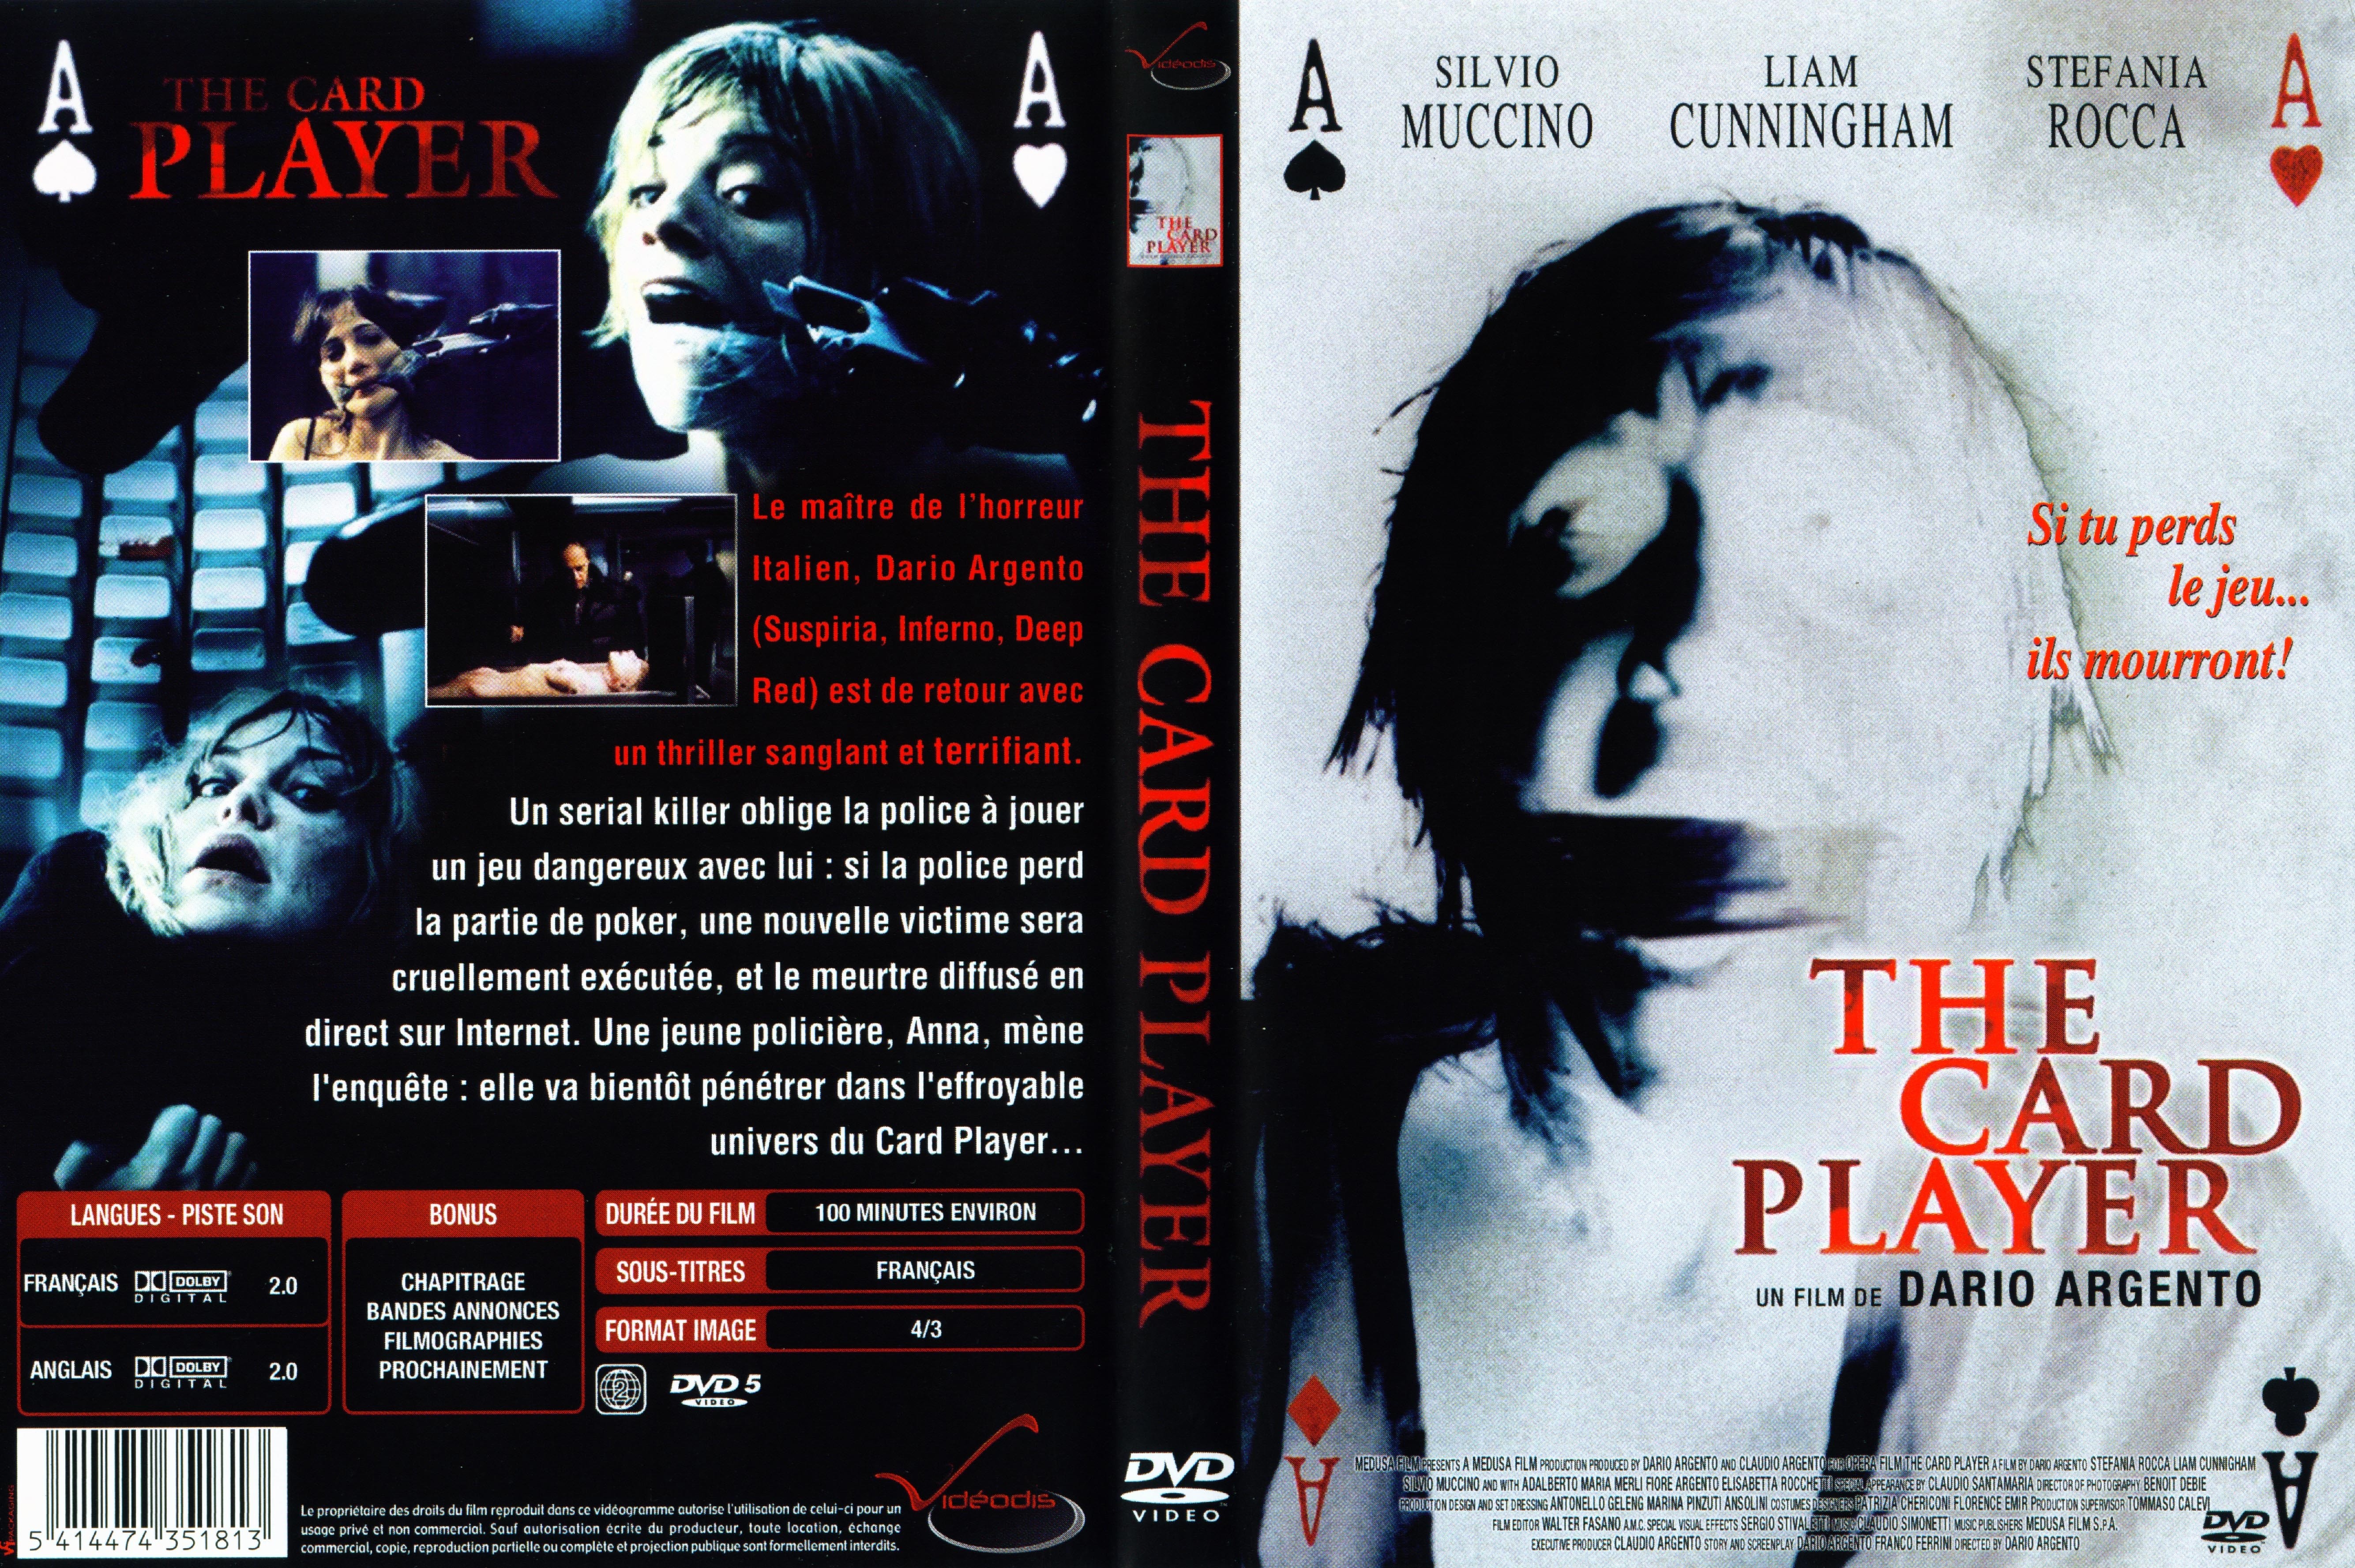 Jaquette DVD The card player